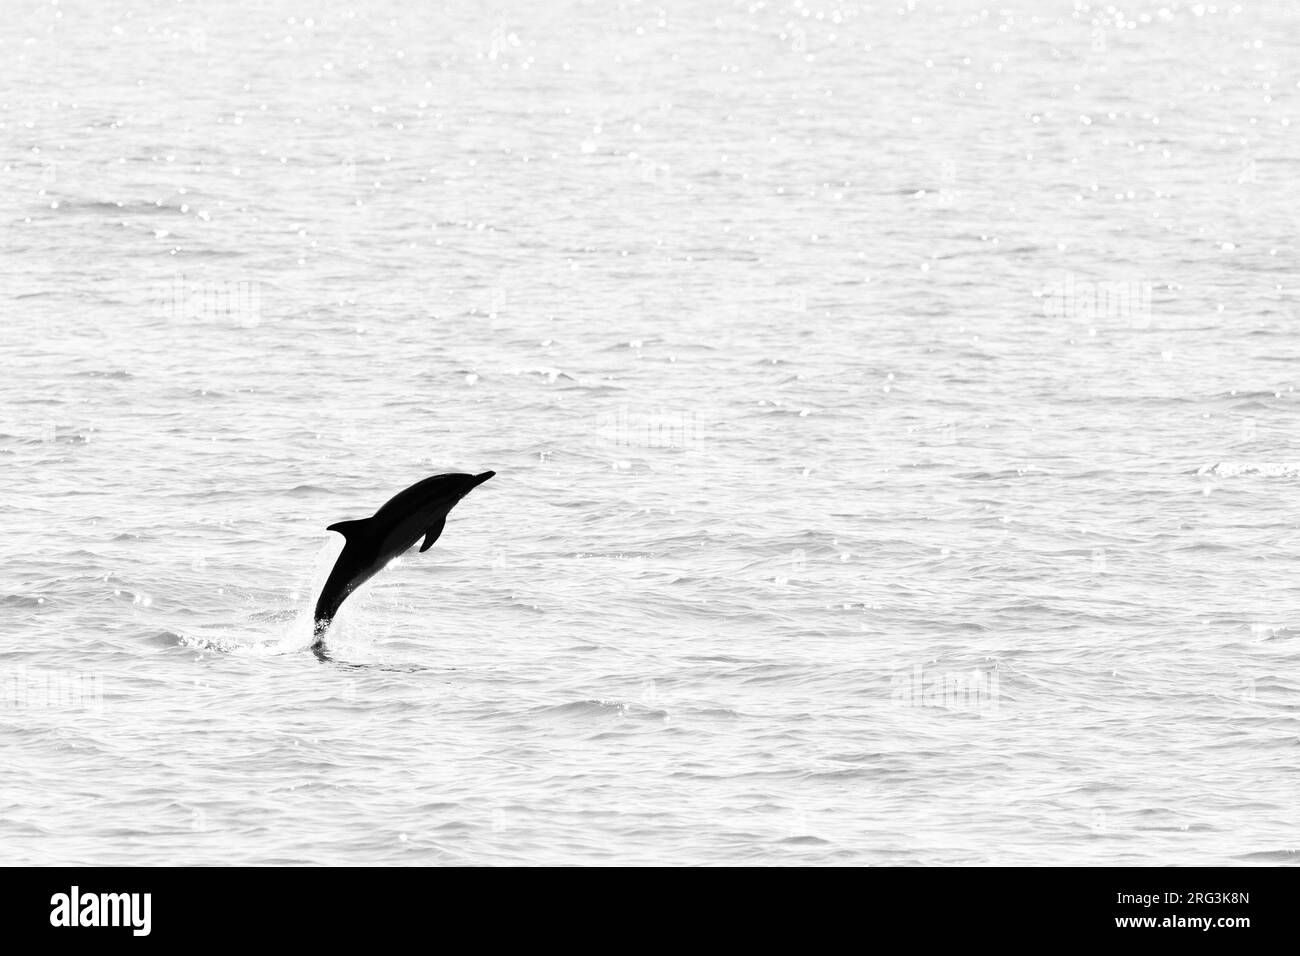 Common dolphin (Delphinus delphis) jumping against the light, with a calm sea as background, in Brittany, France. Stock Photo